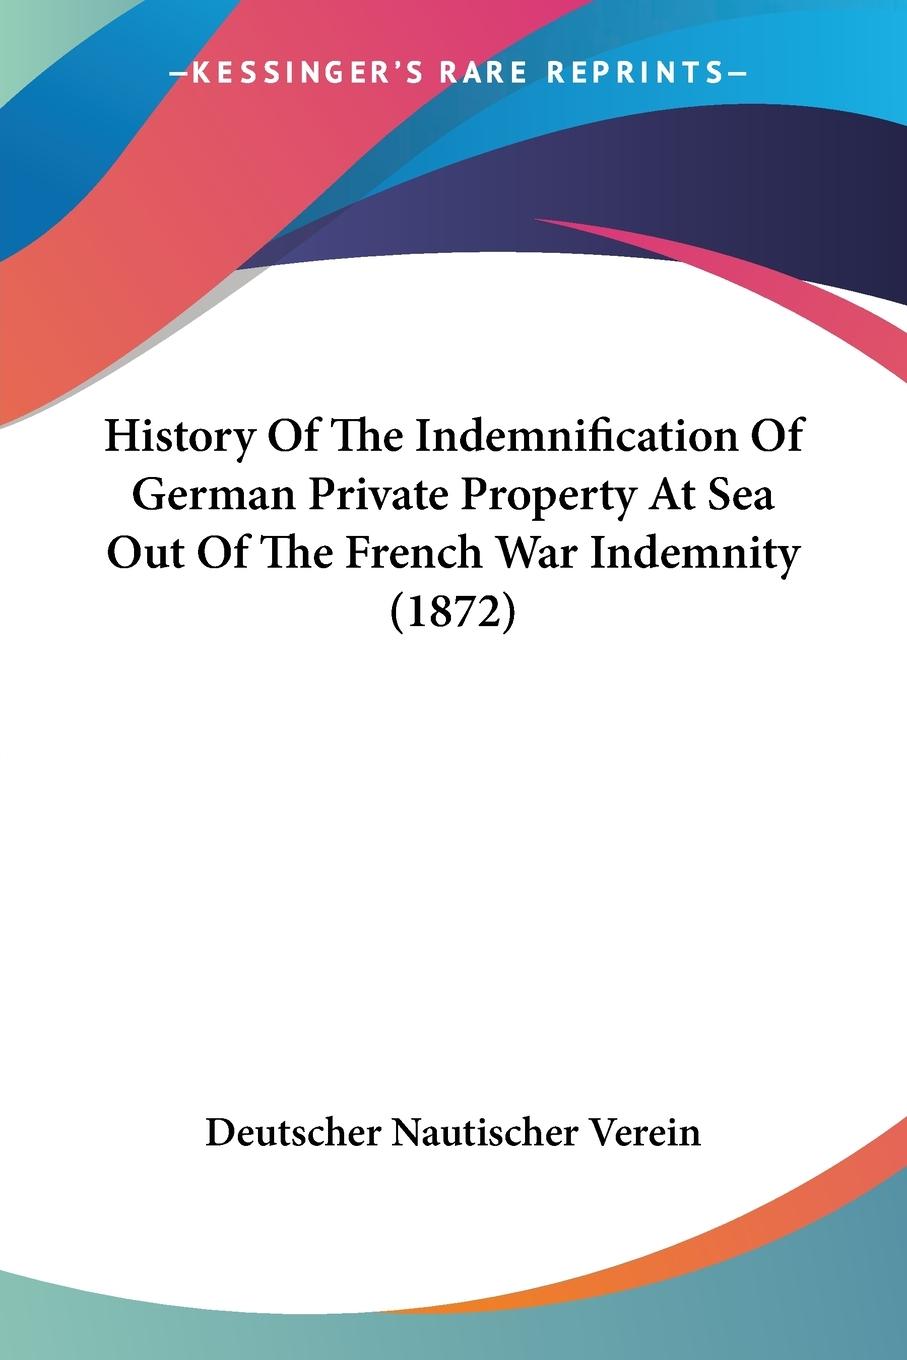 History Of The Indemnification Of German Private Property At Sea Out Of The French War Indemnity (1872) - Deutscher Nautischer Verein